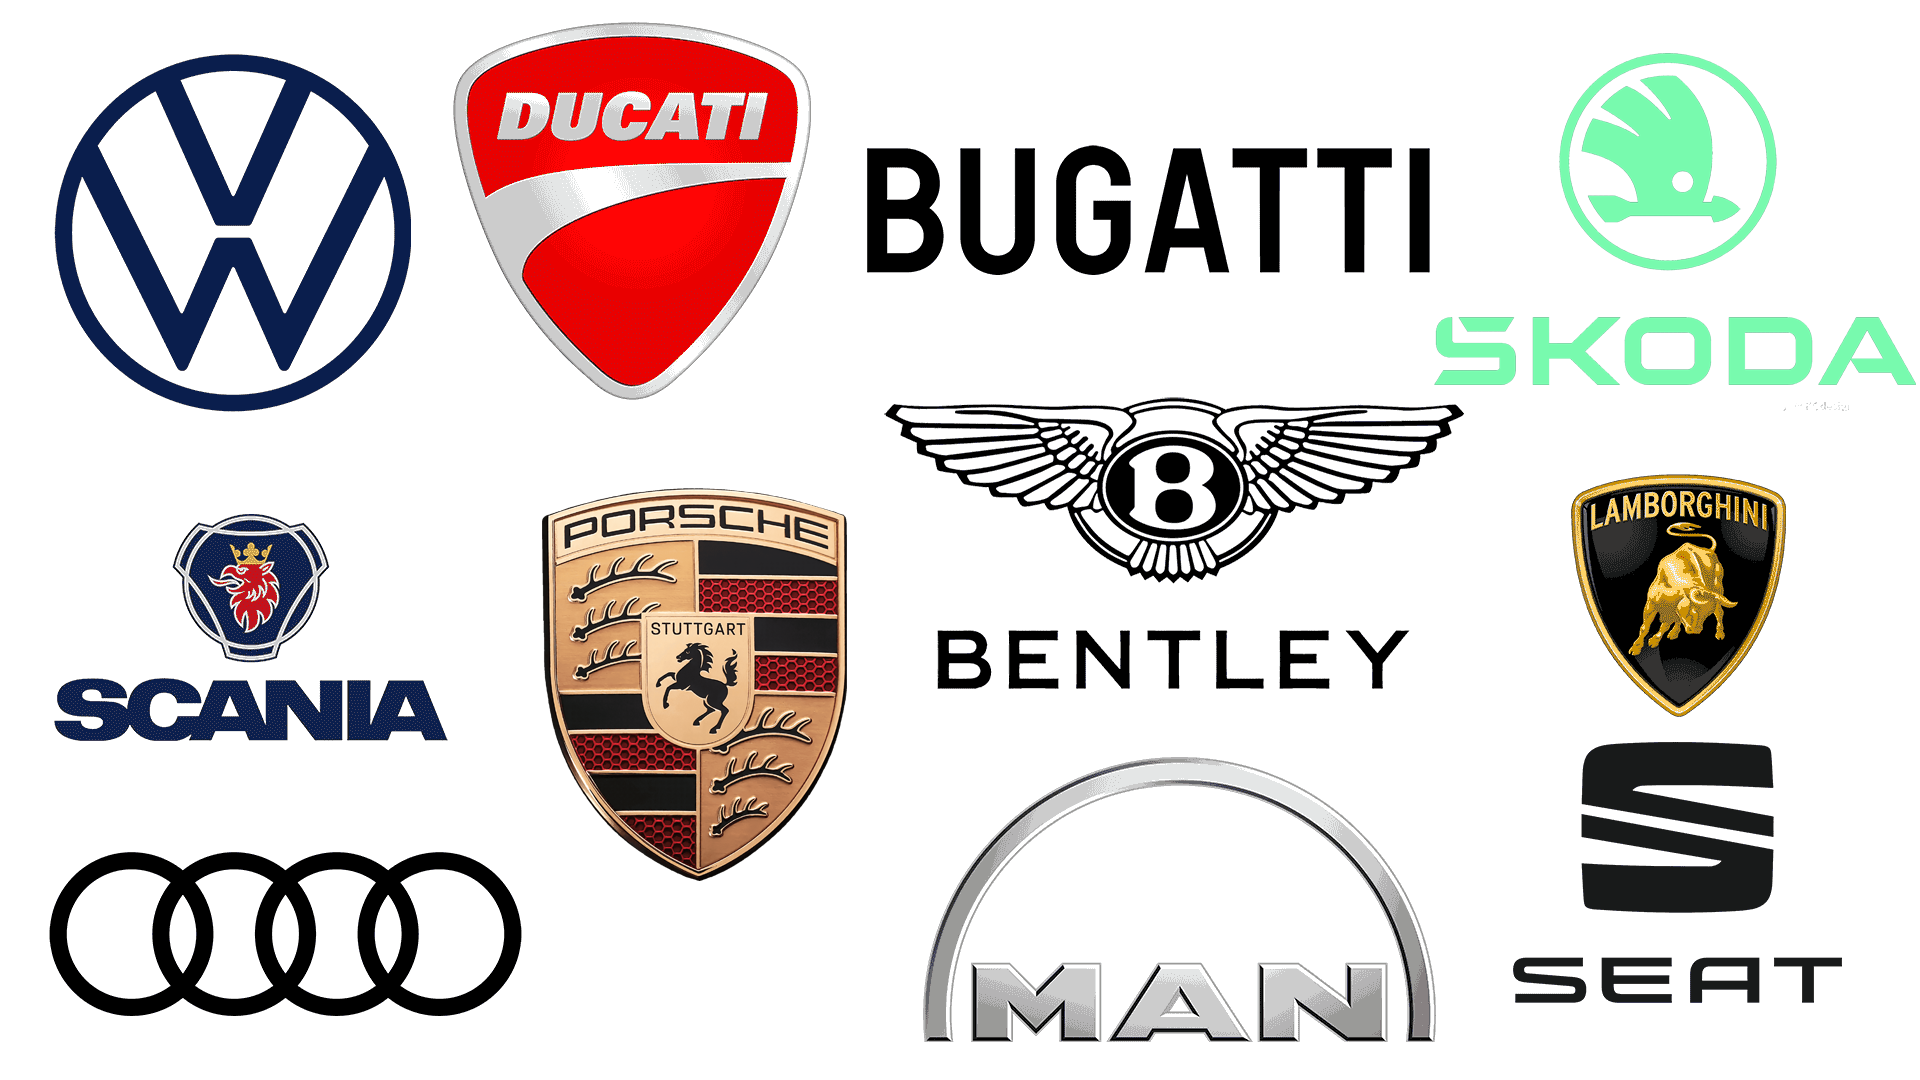 Car brands list and who owns which car brands?